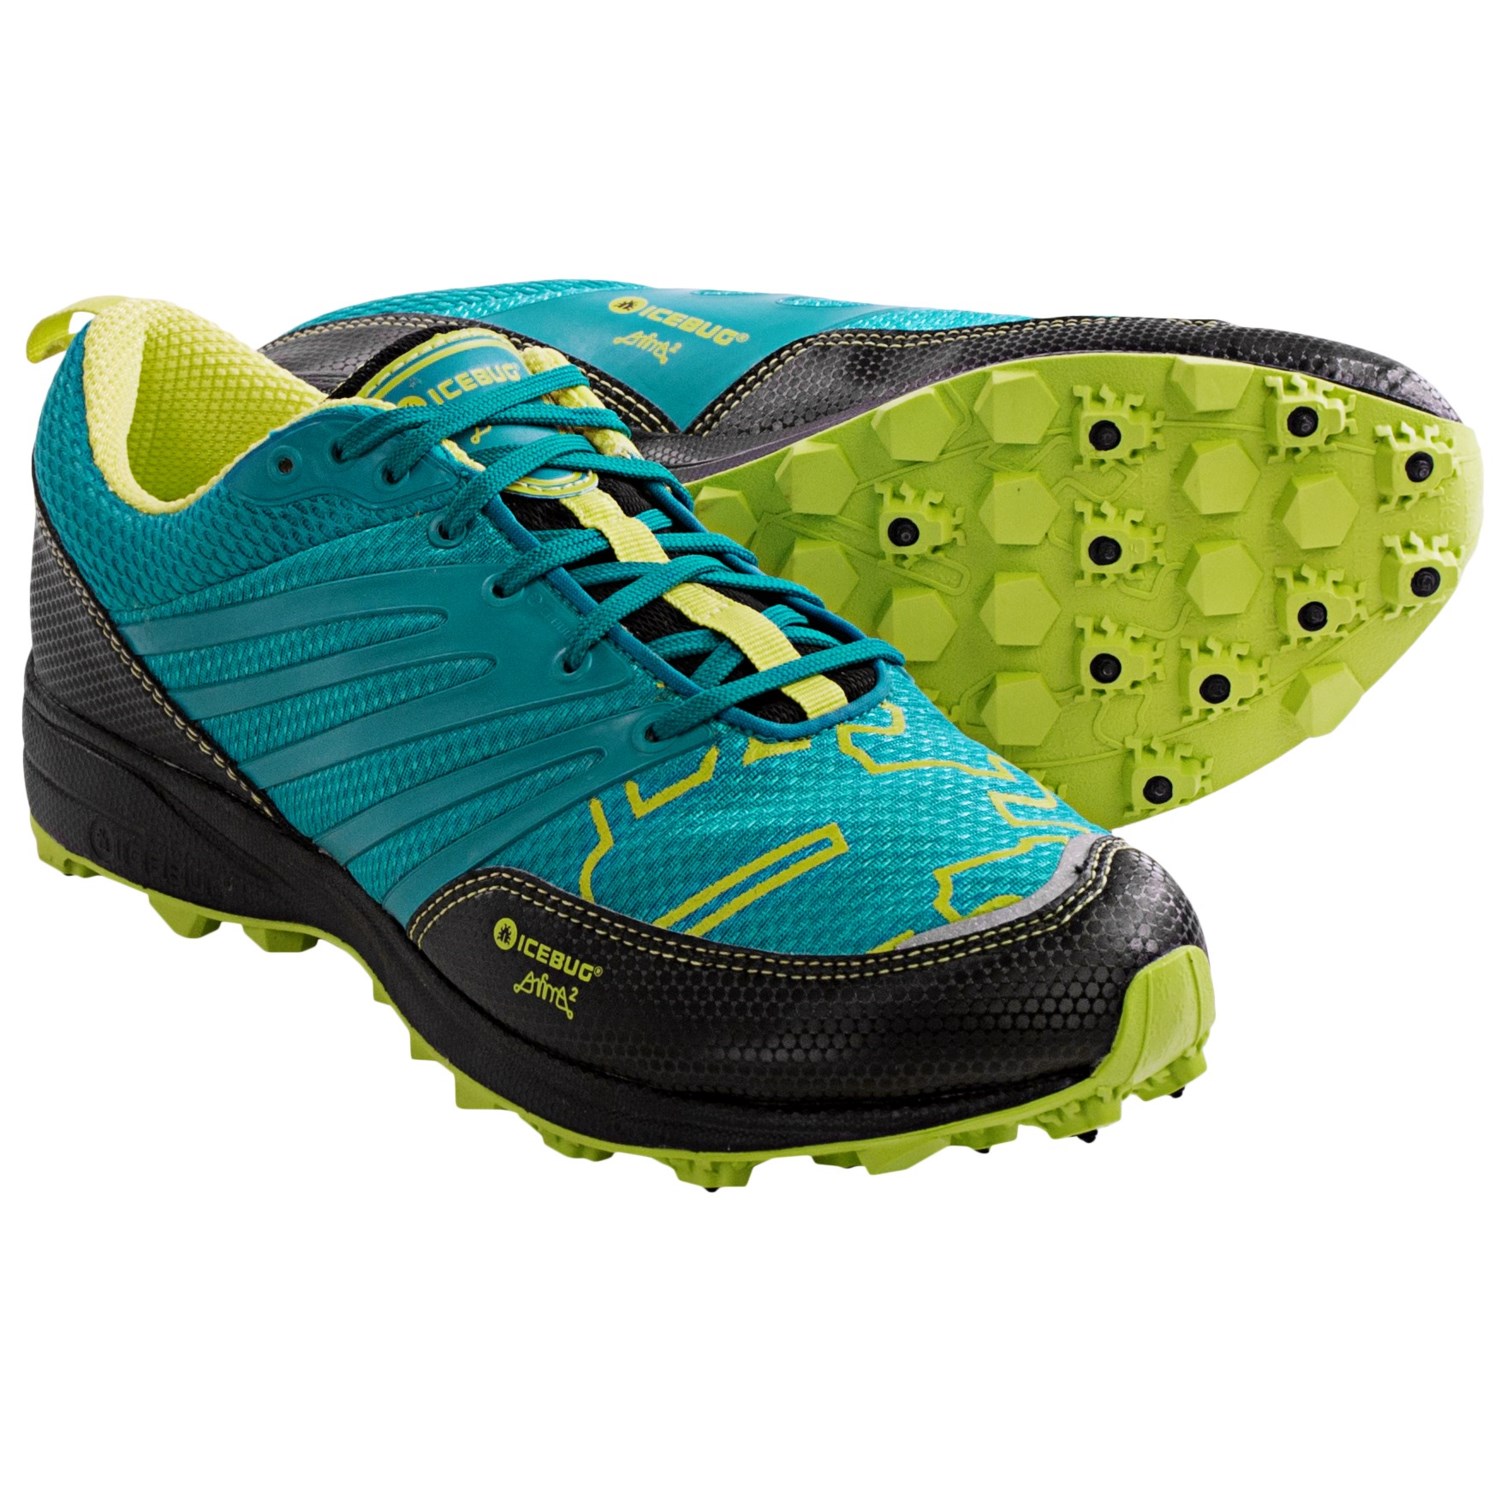 Icebug Anima2 BUGrip® Trail Running Shoes (For Men) in Opal